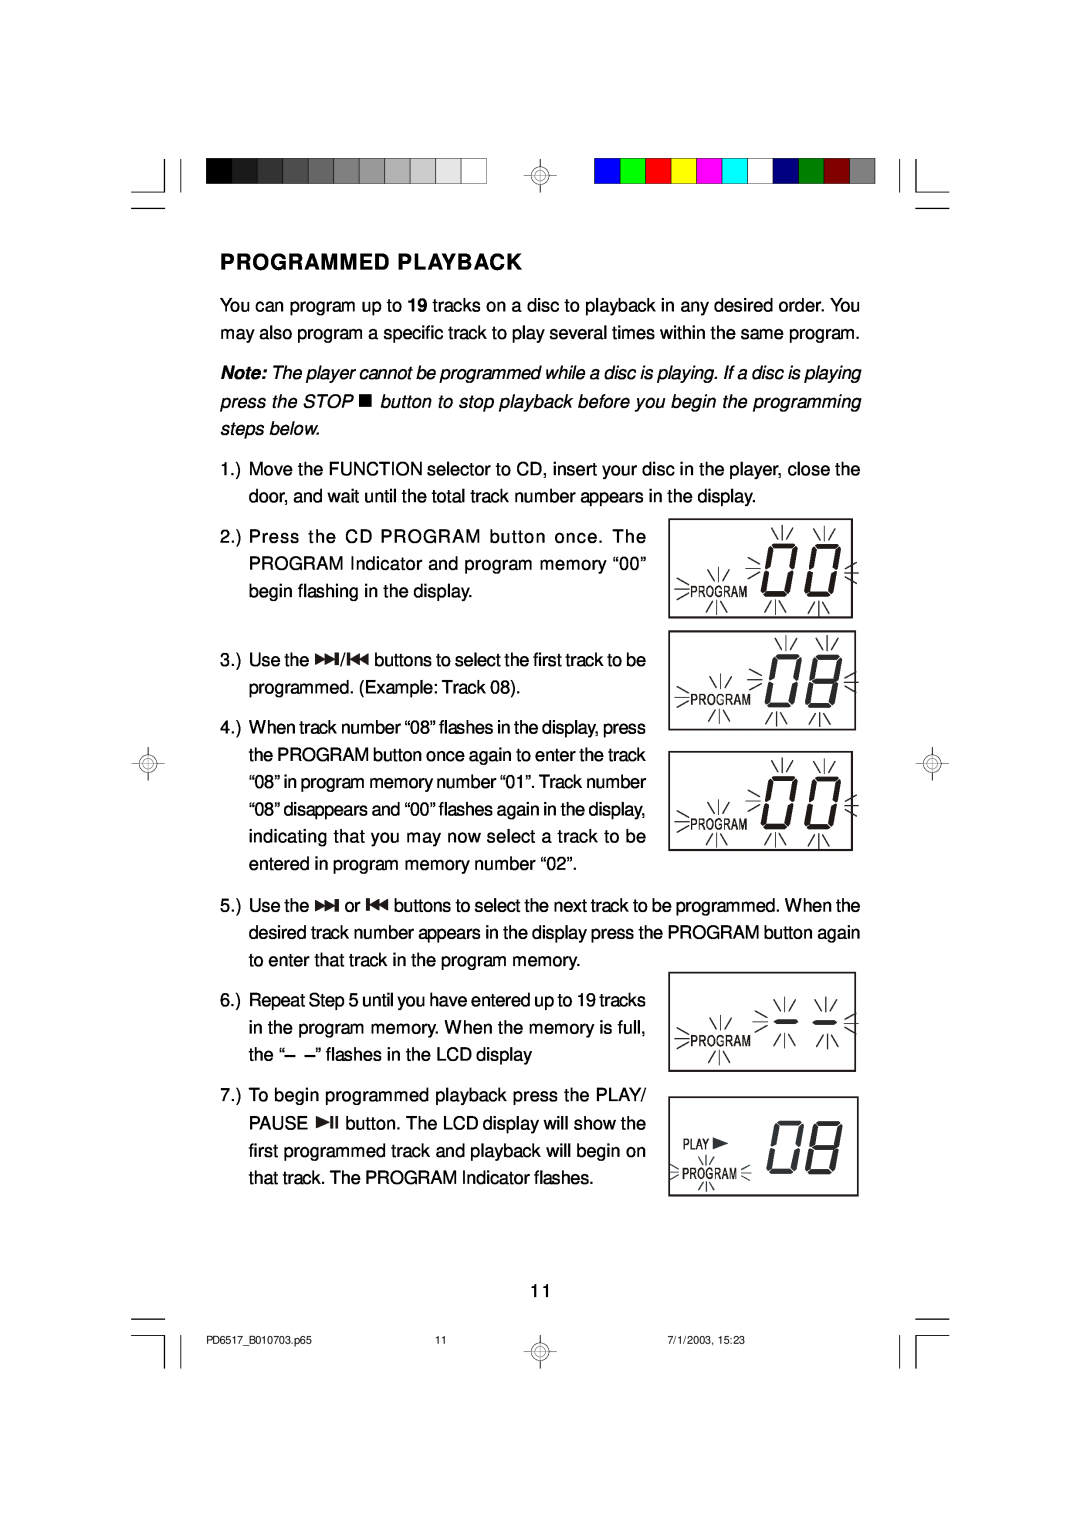 Emerson PD6517 owner manual Programmed Playback 